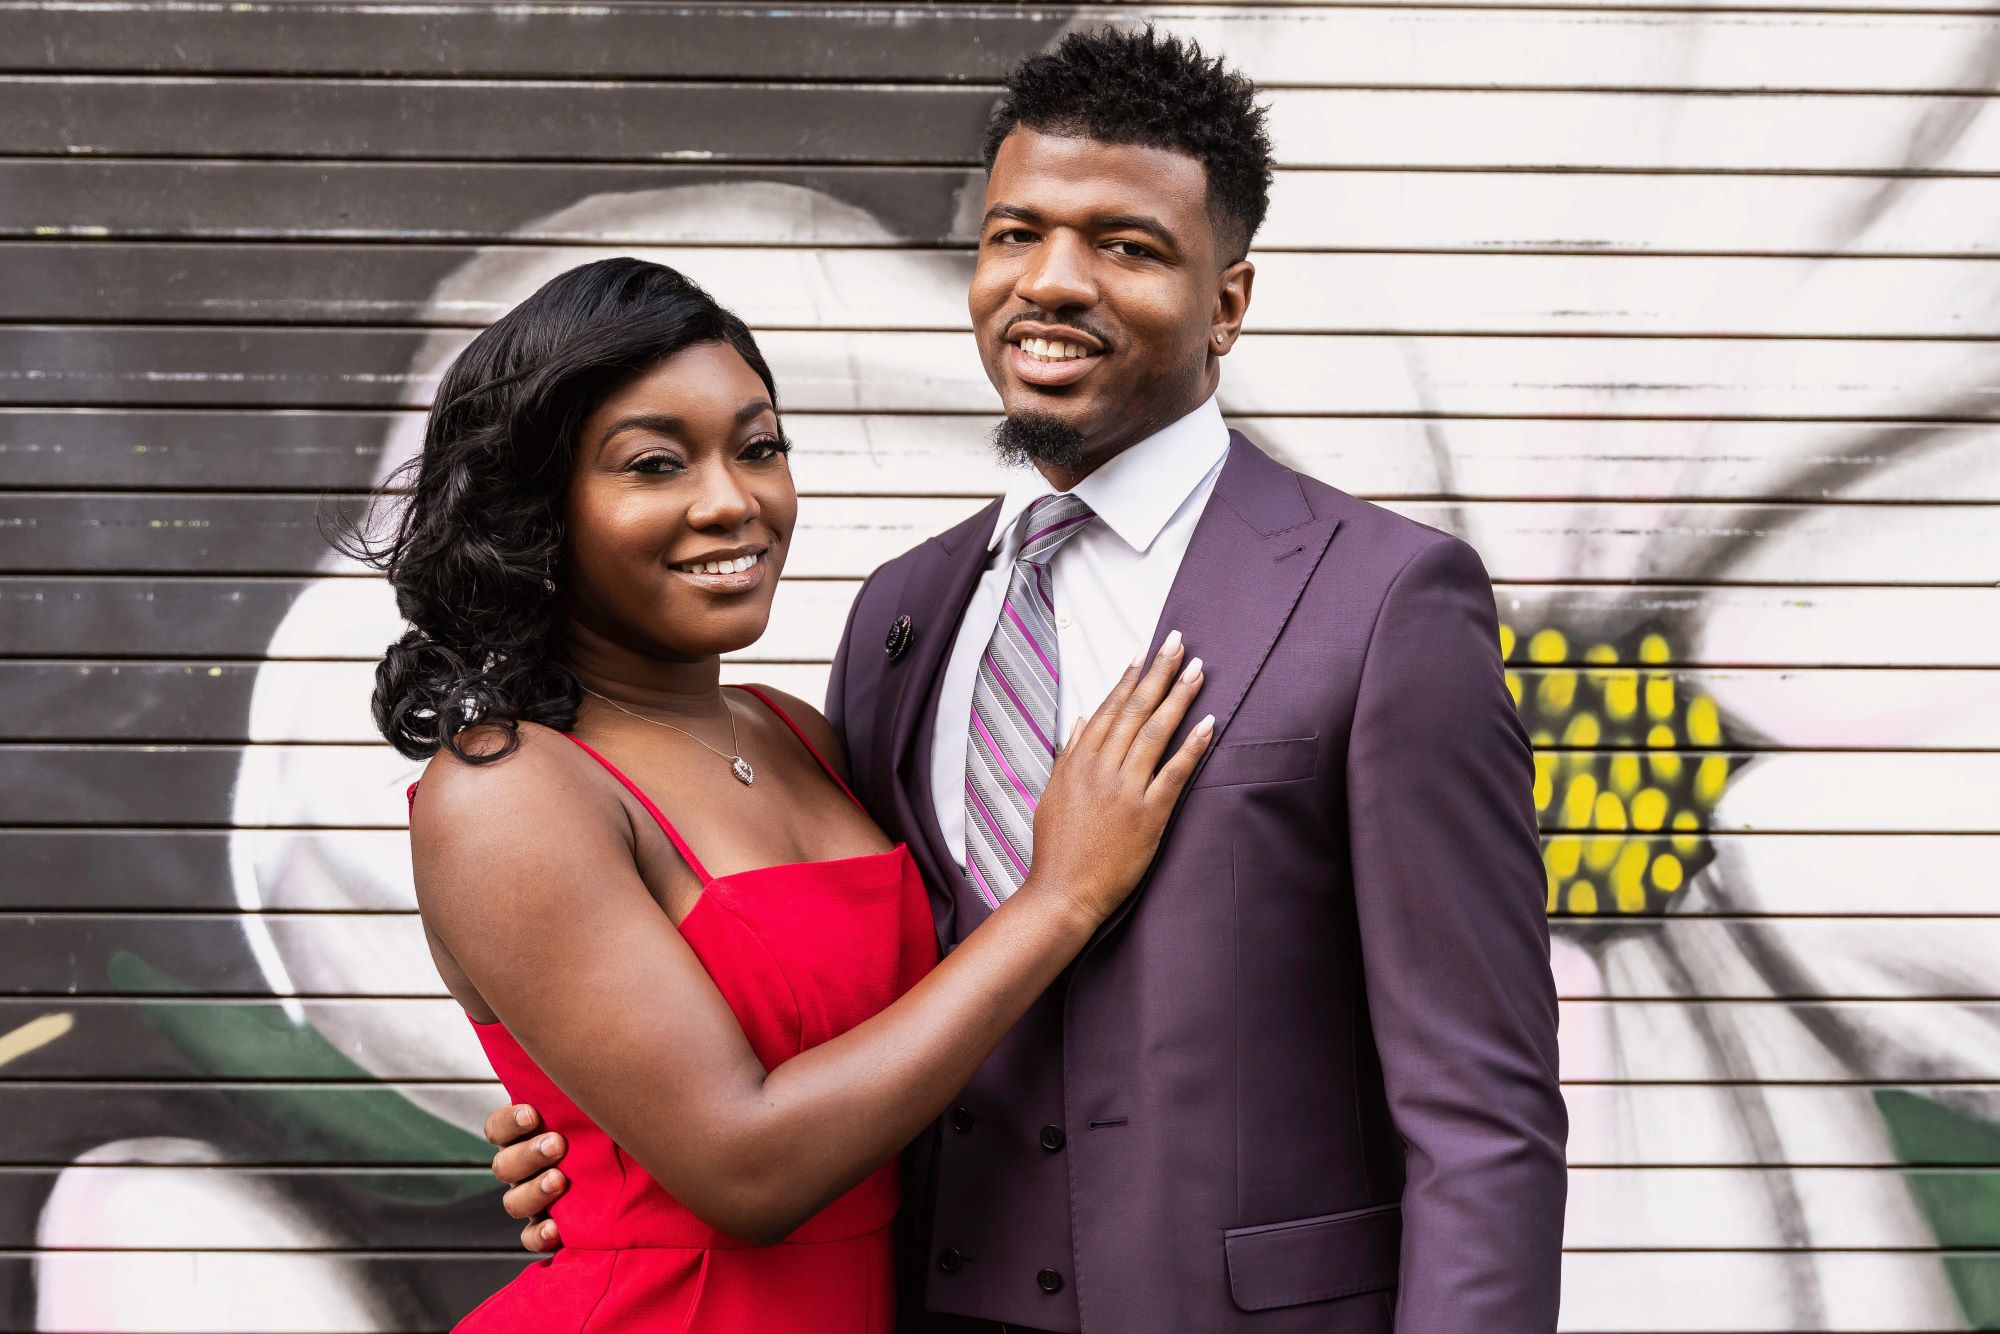 'Married at First Sight' contestant reveals his ex is pregnant